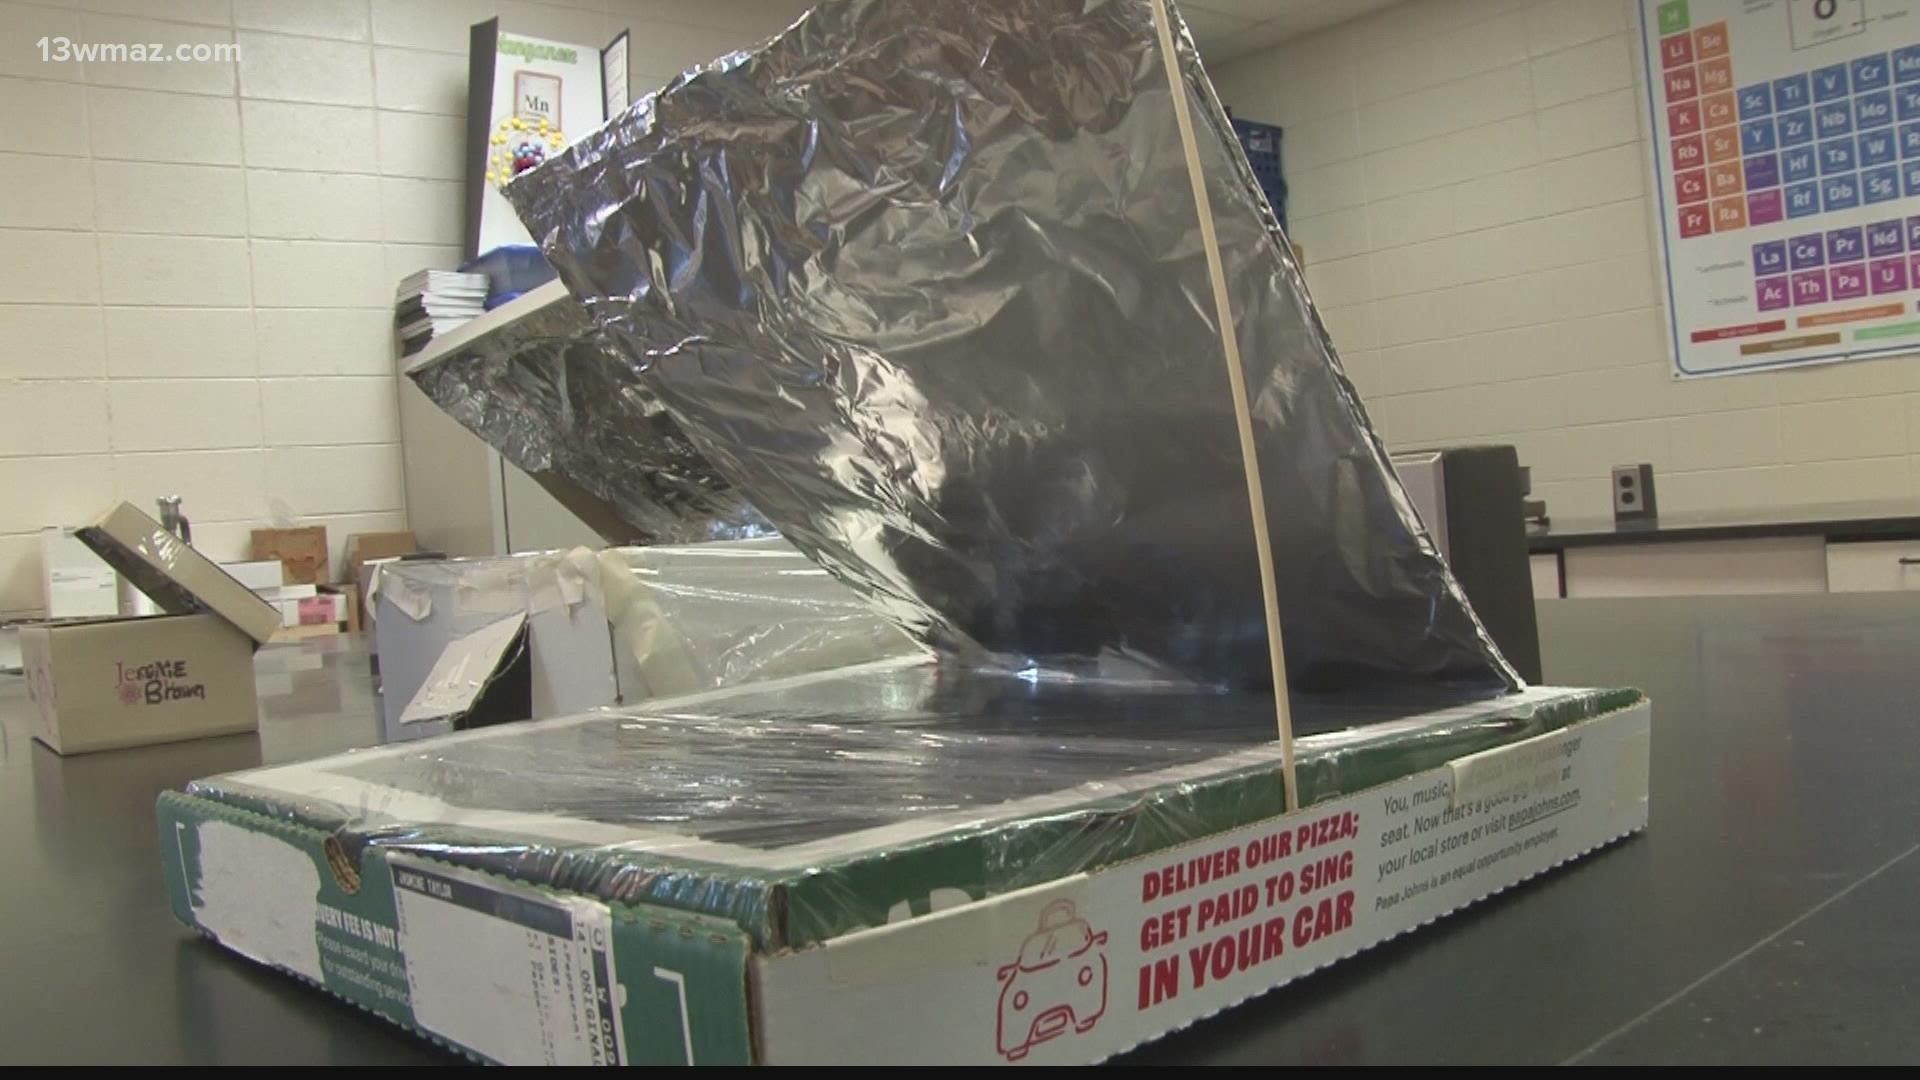 Activities like solar ovens do more than just getting students creative juices flowing.